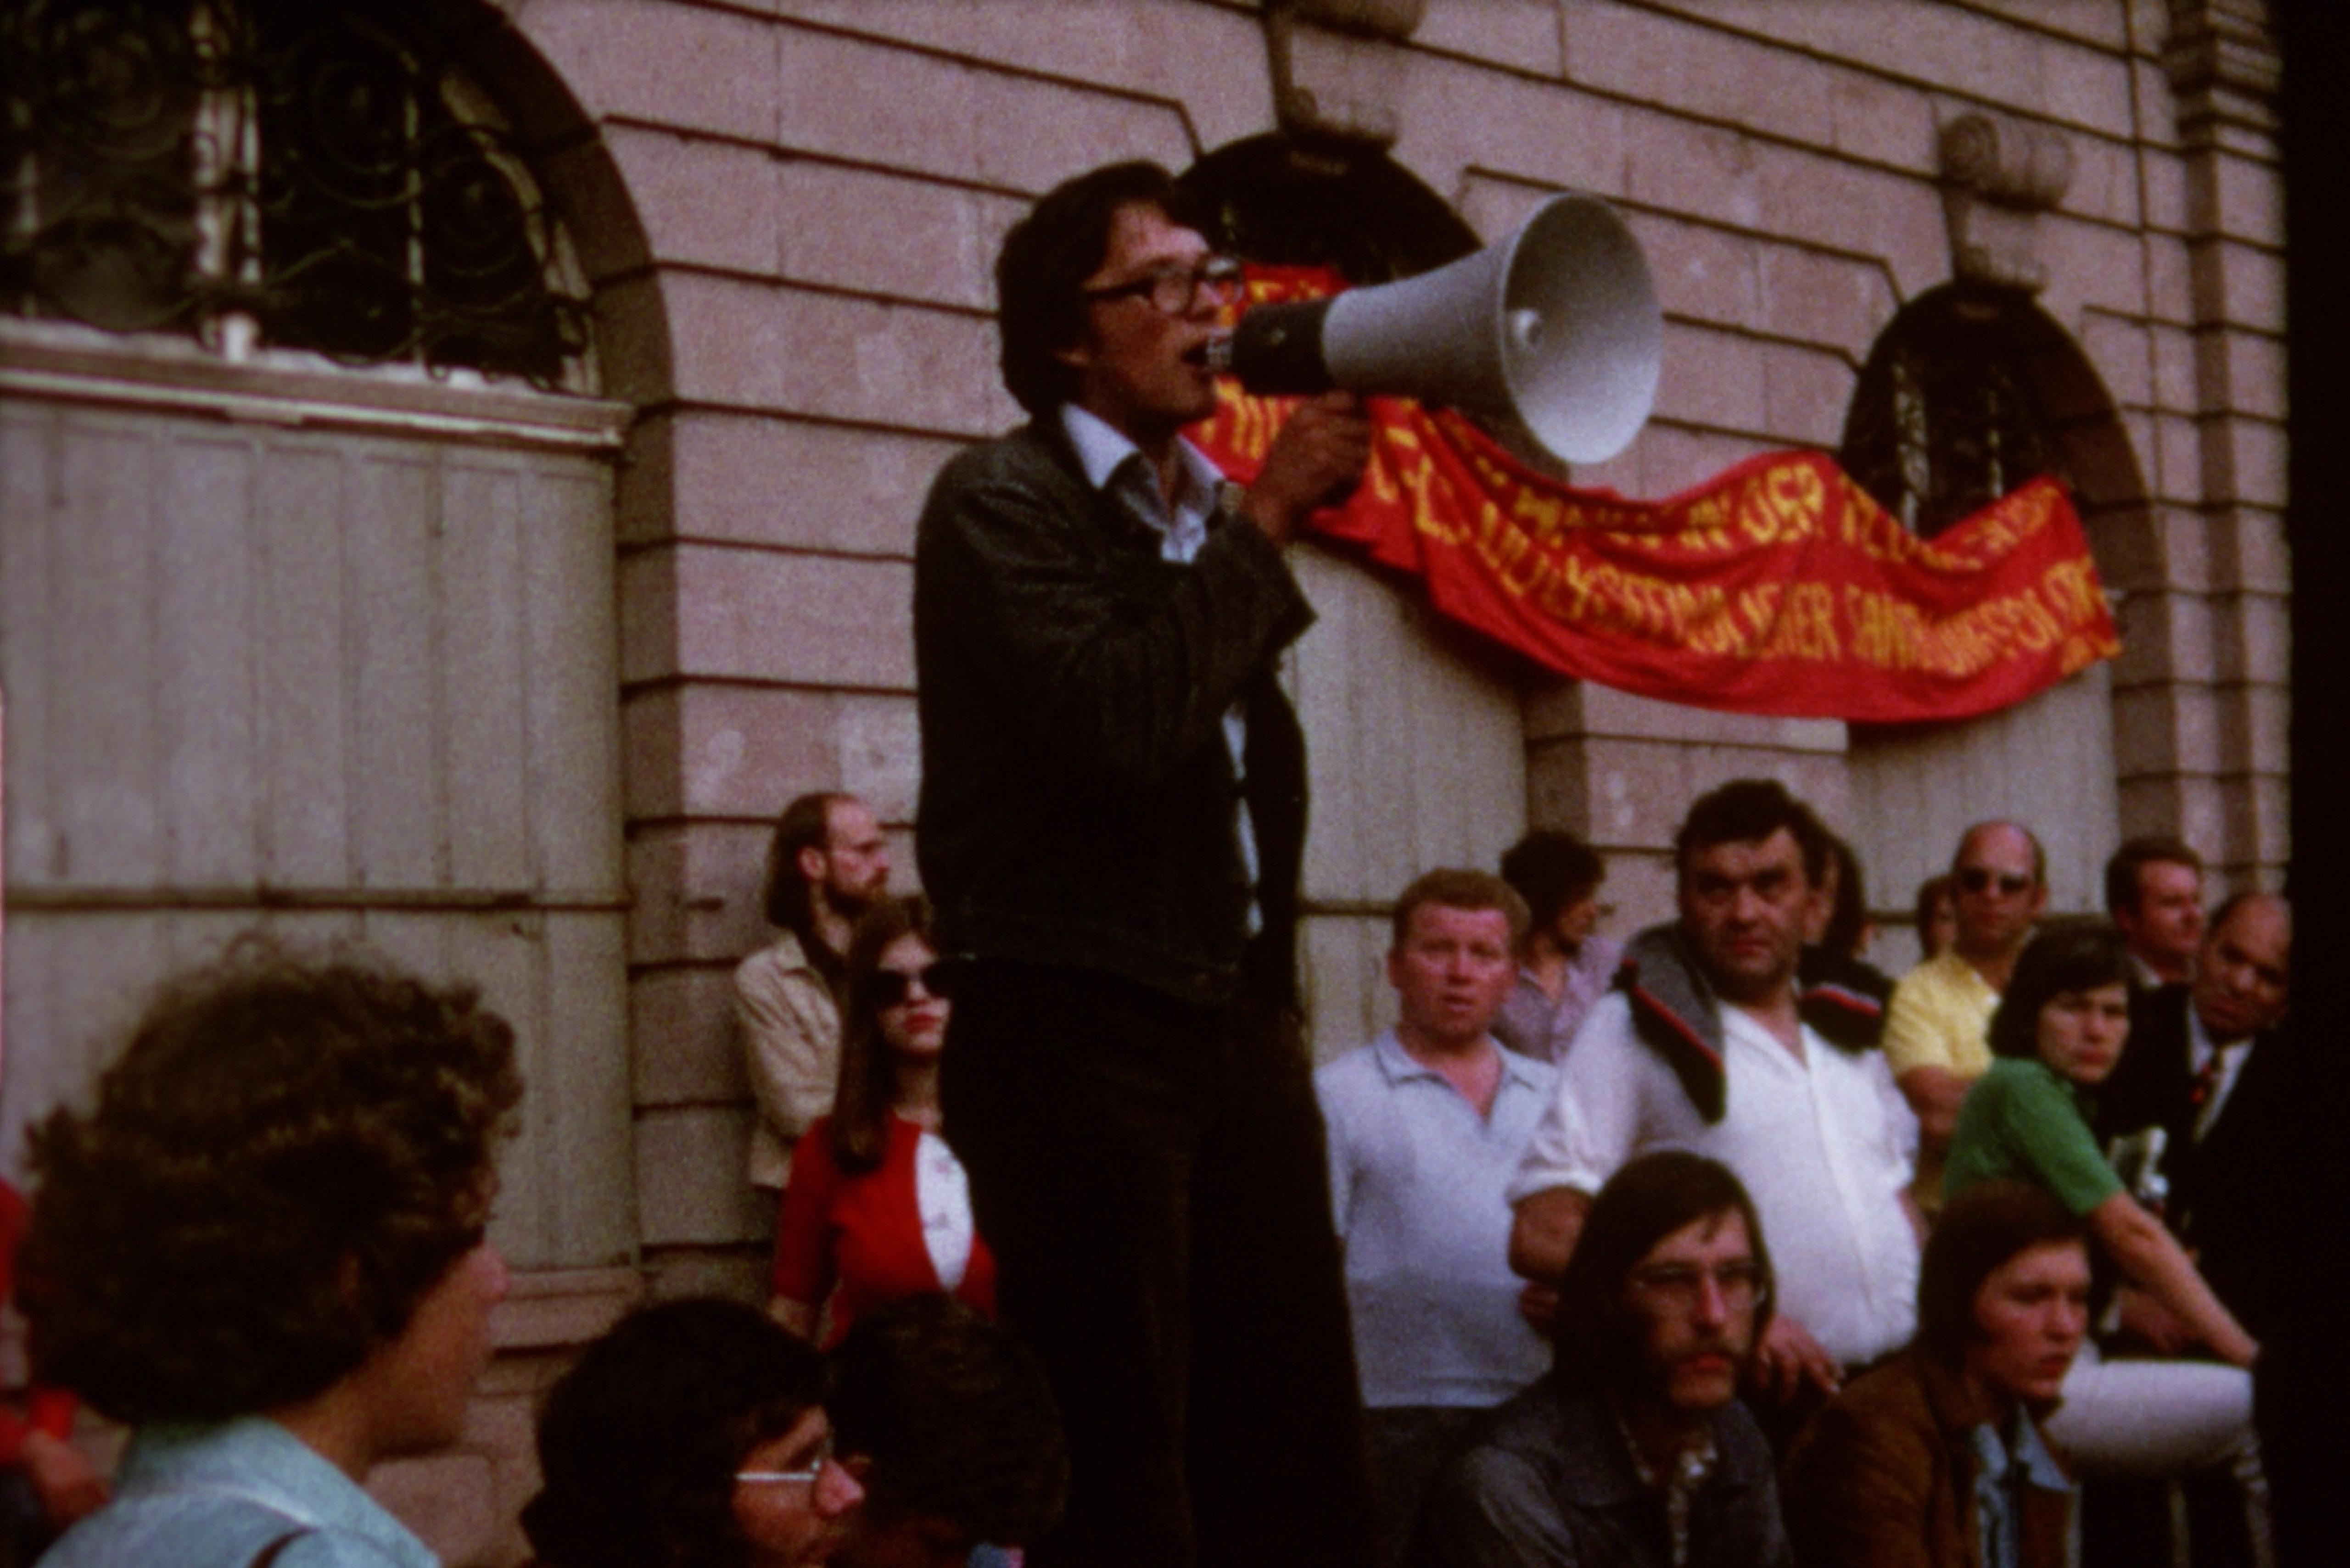 A man speaks into a megaphone. Around him, several people sit on the sidewalk in front of a building on which a red banner hangs.